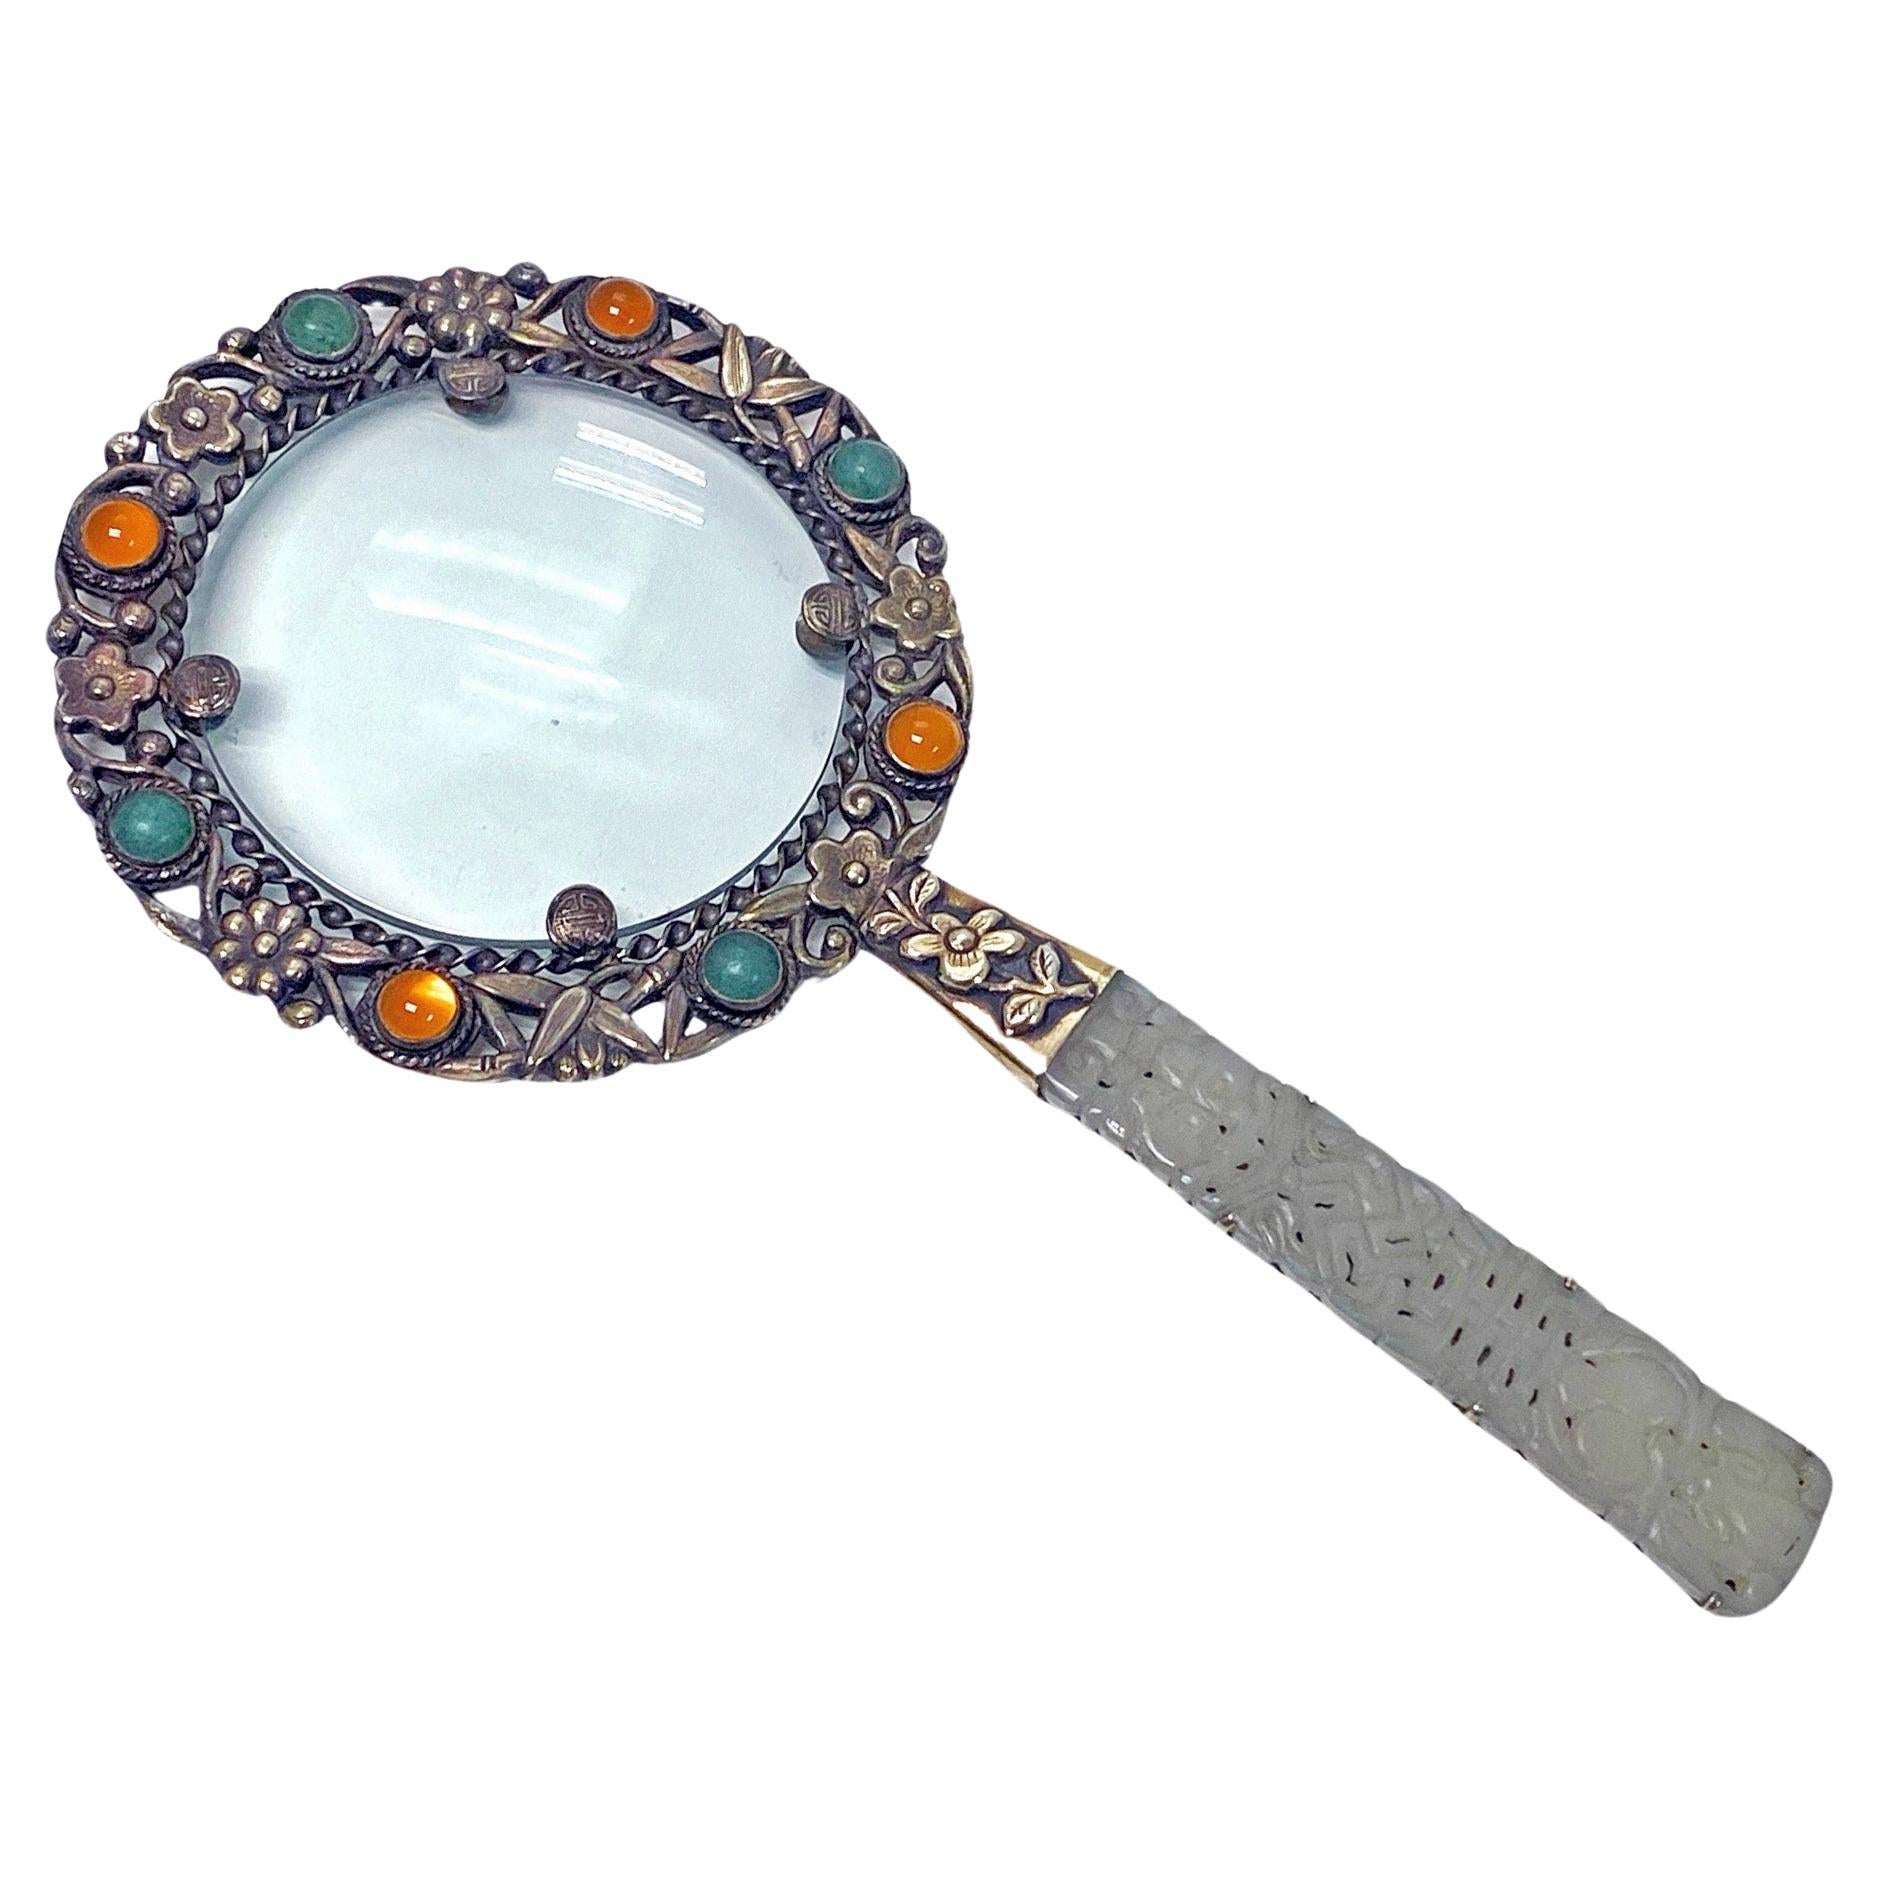  Chinese Export Silver and Jade Magnifying Glass, C.1890